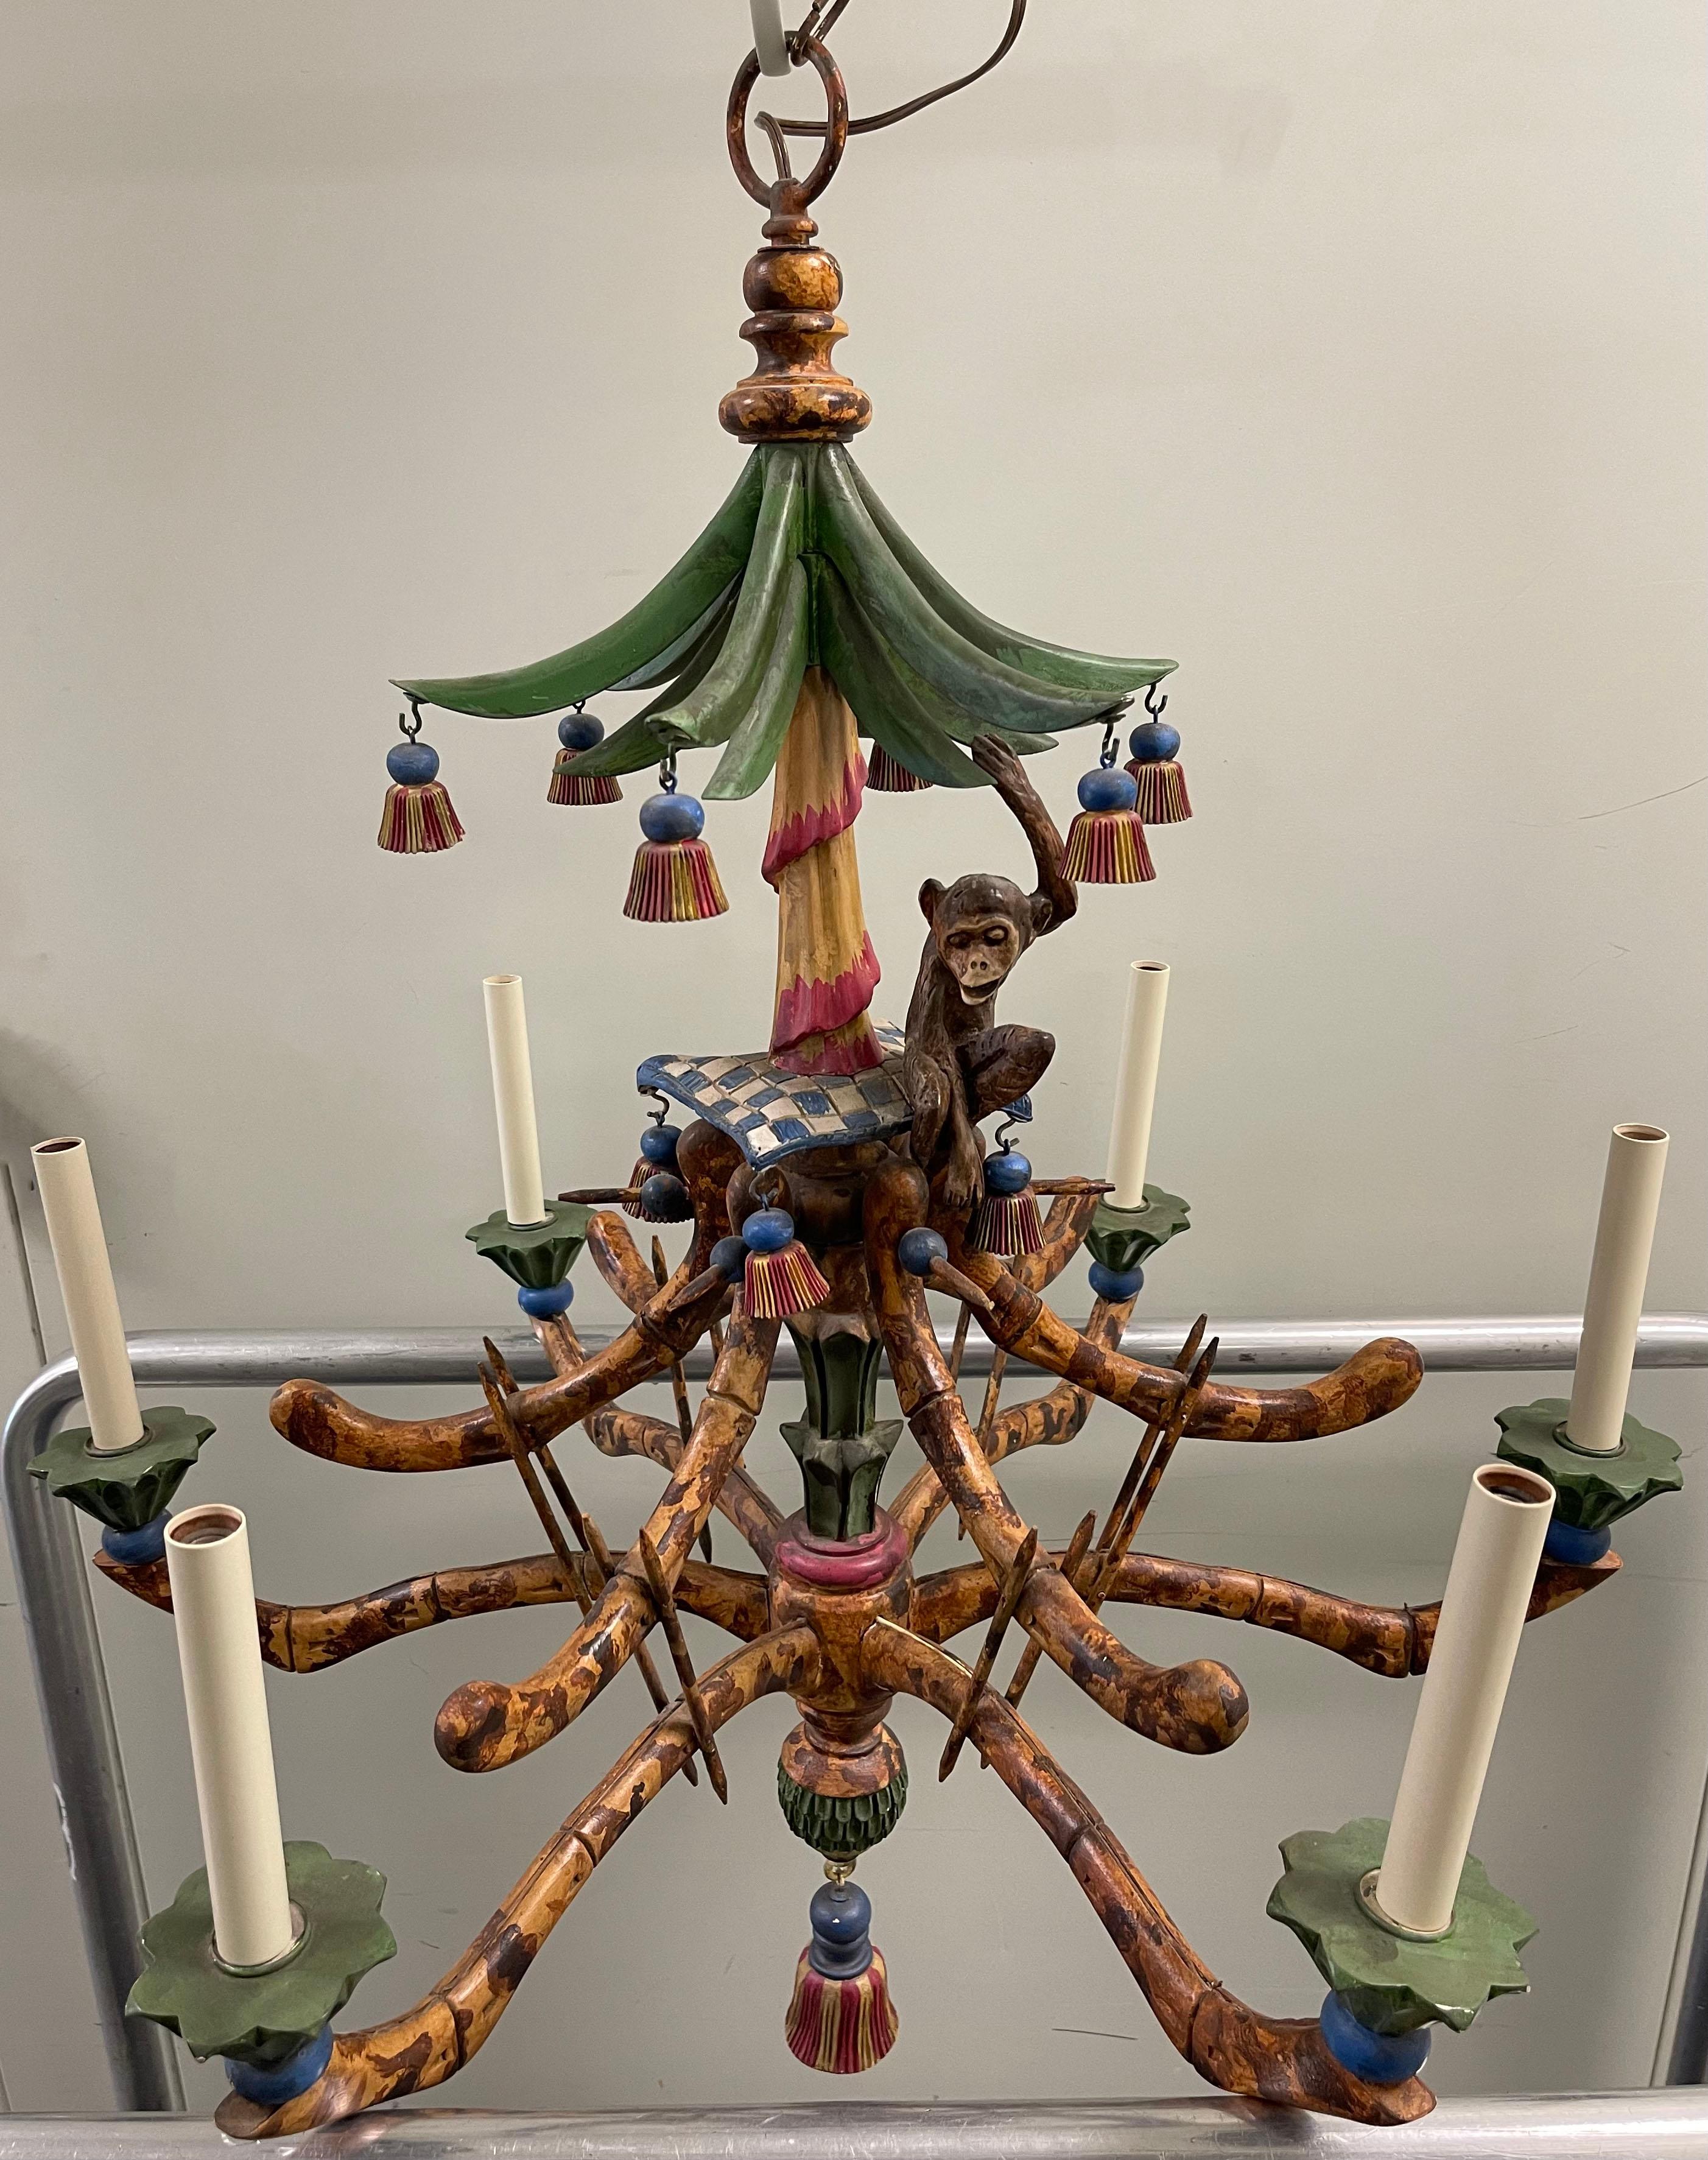 Chinoiserie faux bamboo custom faux painted chandelier. Tassel accents and hanging monkey figurine. Takes six chandelier bulbs (not included). Chain and 20